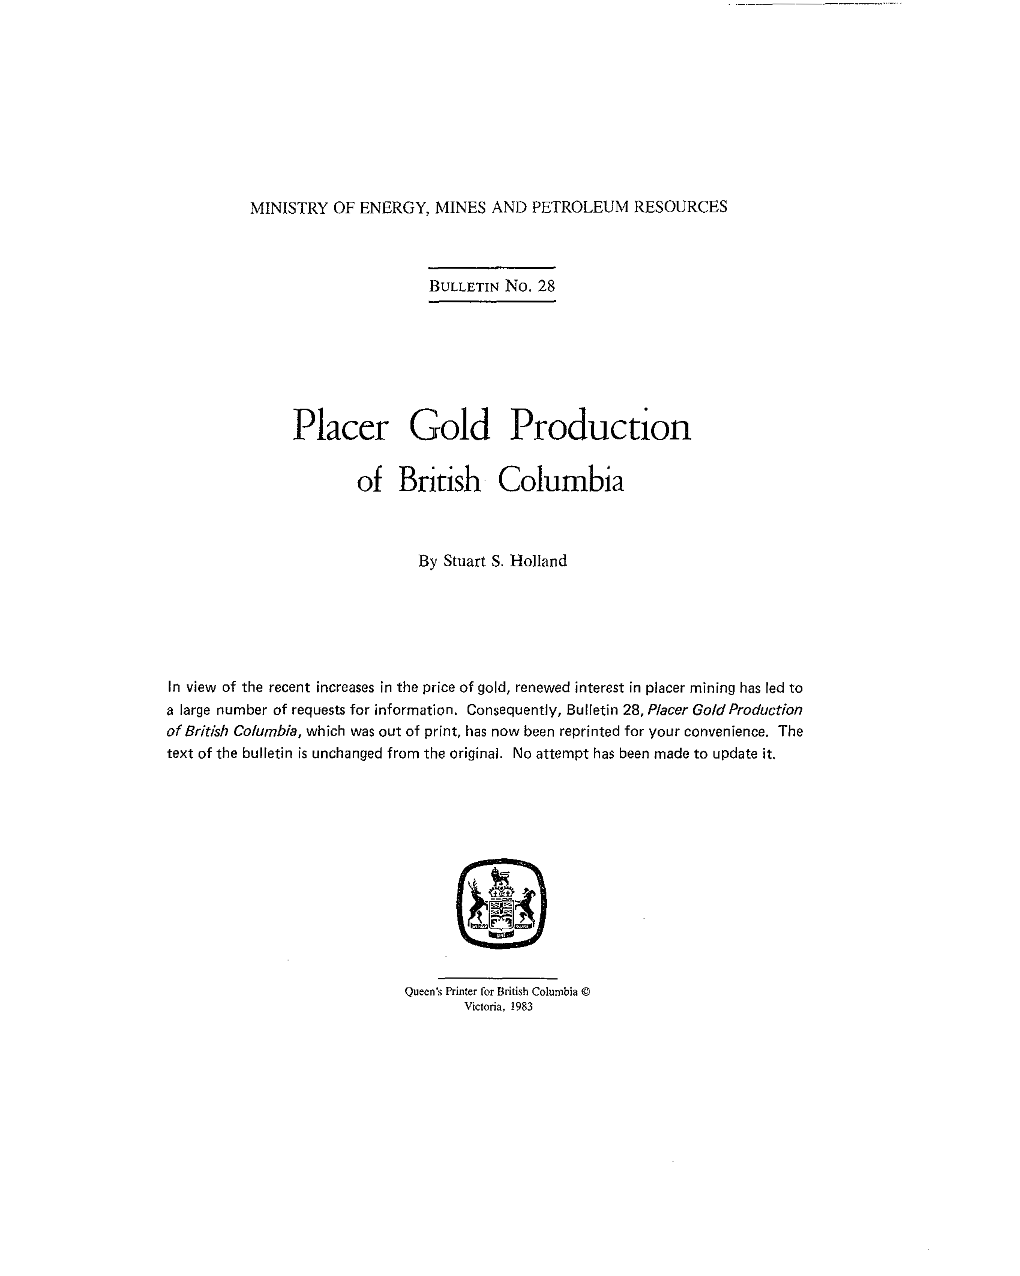 Placer Gold Production of British Columbia